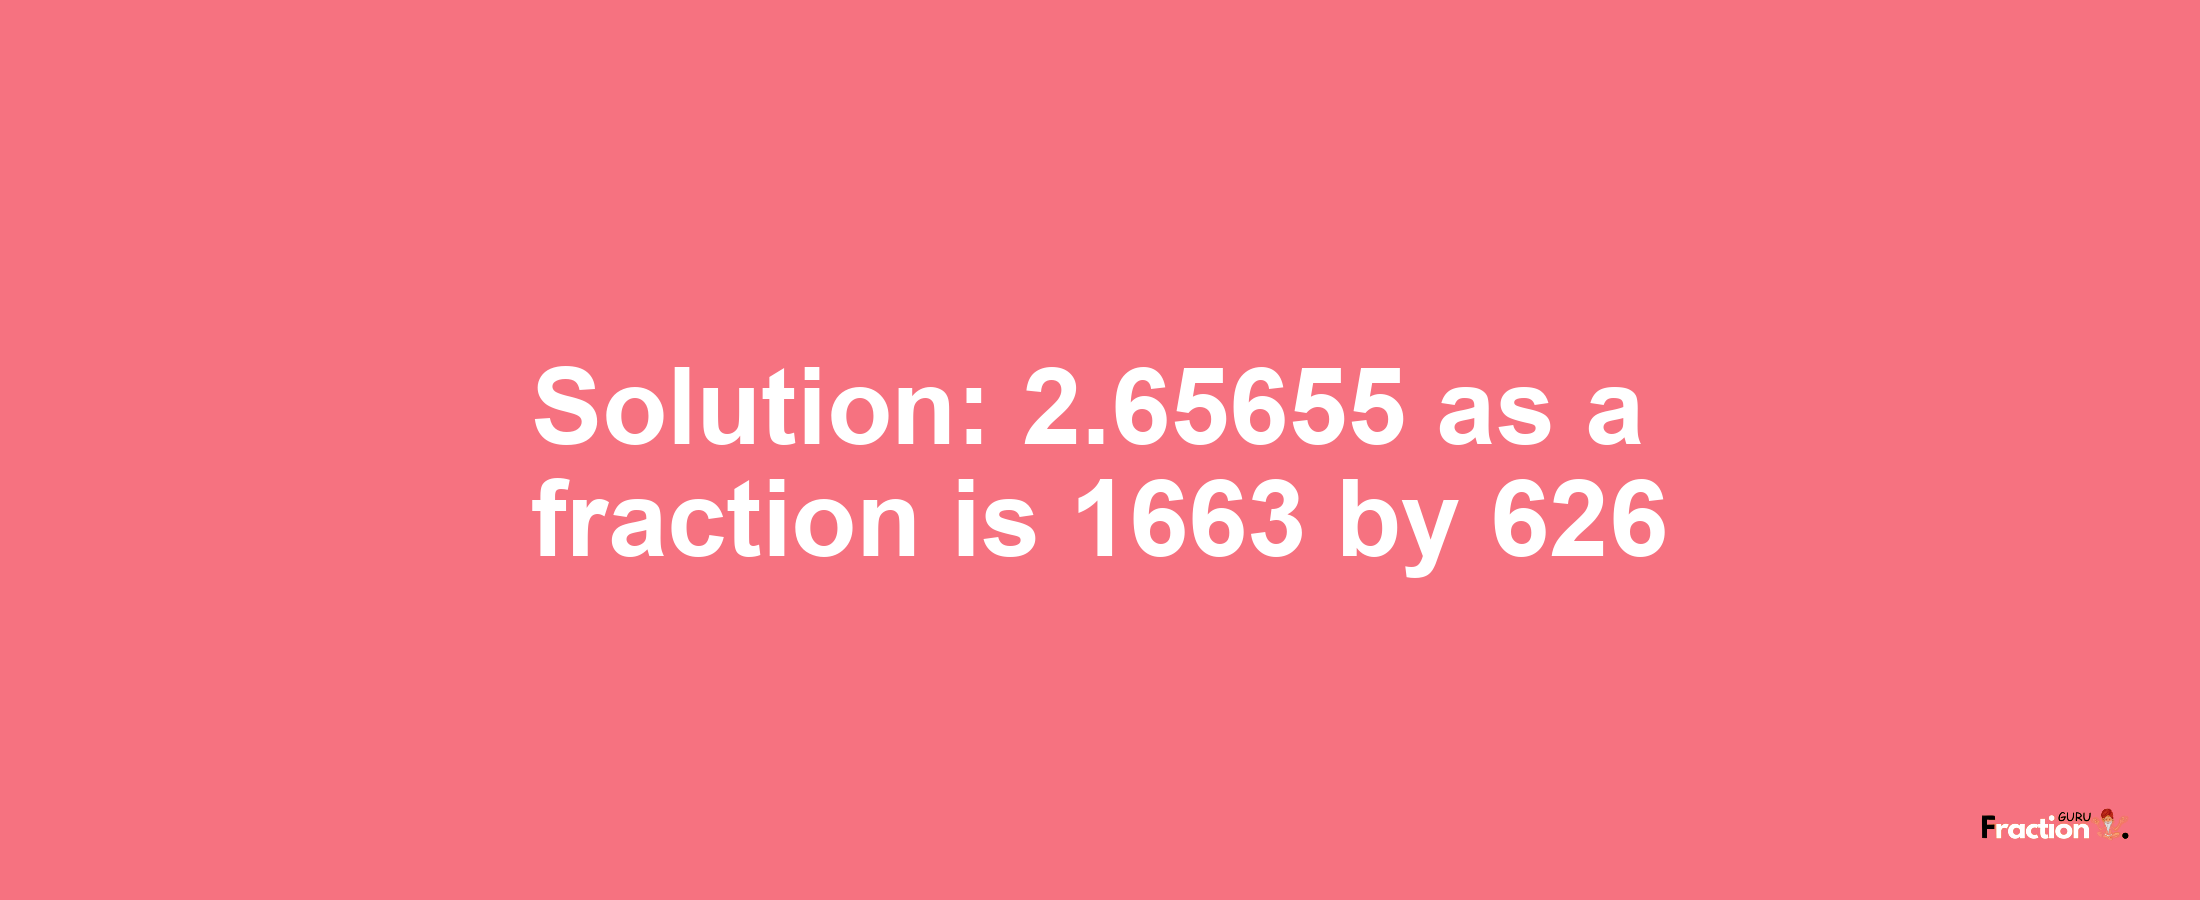 Solution:2.65655 as a fraction is 1663/626